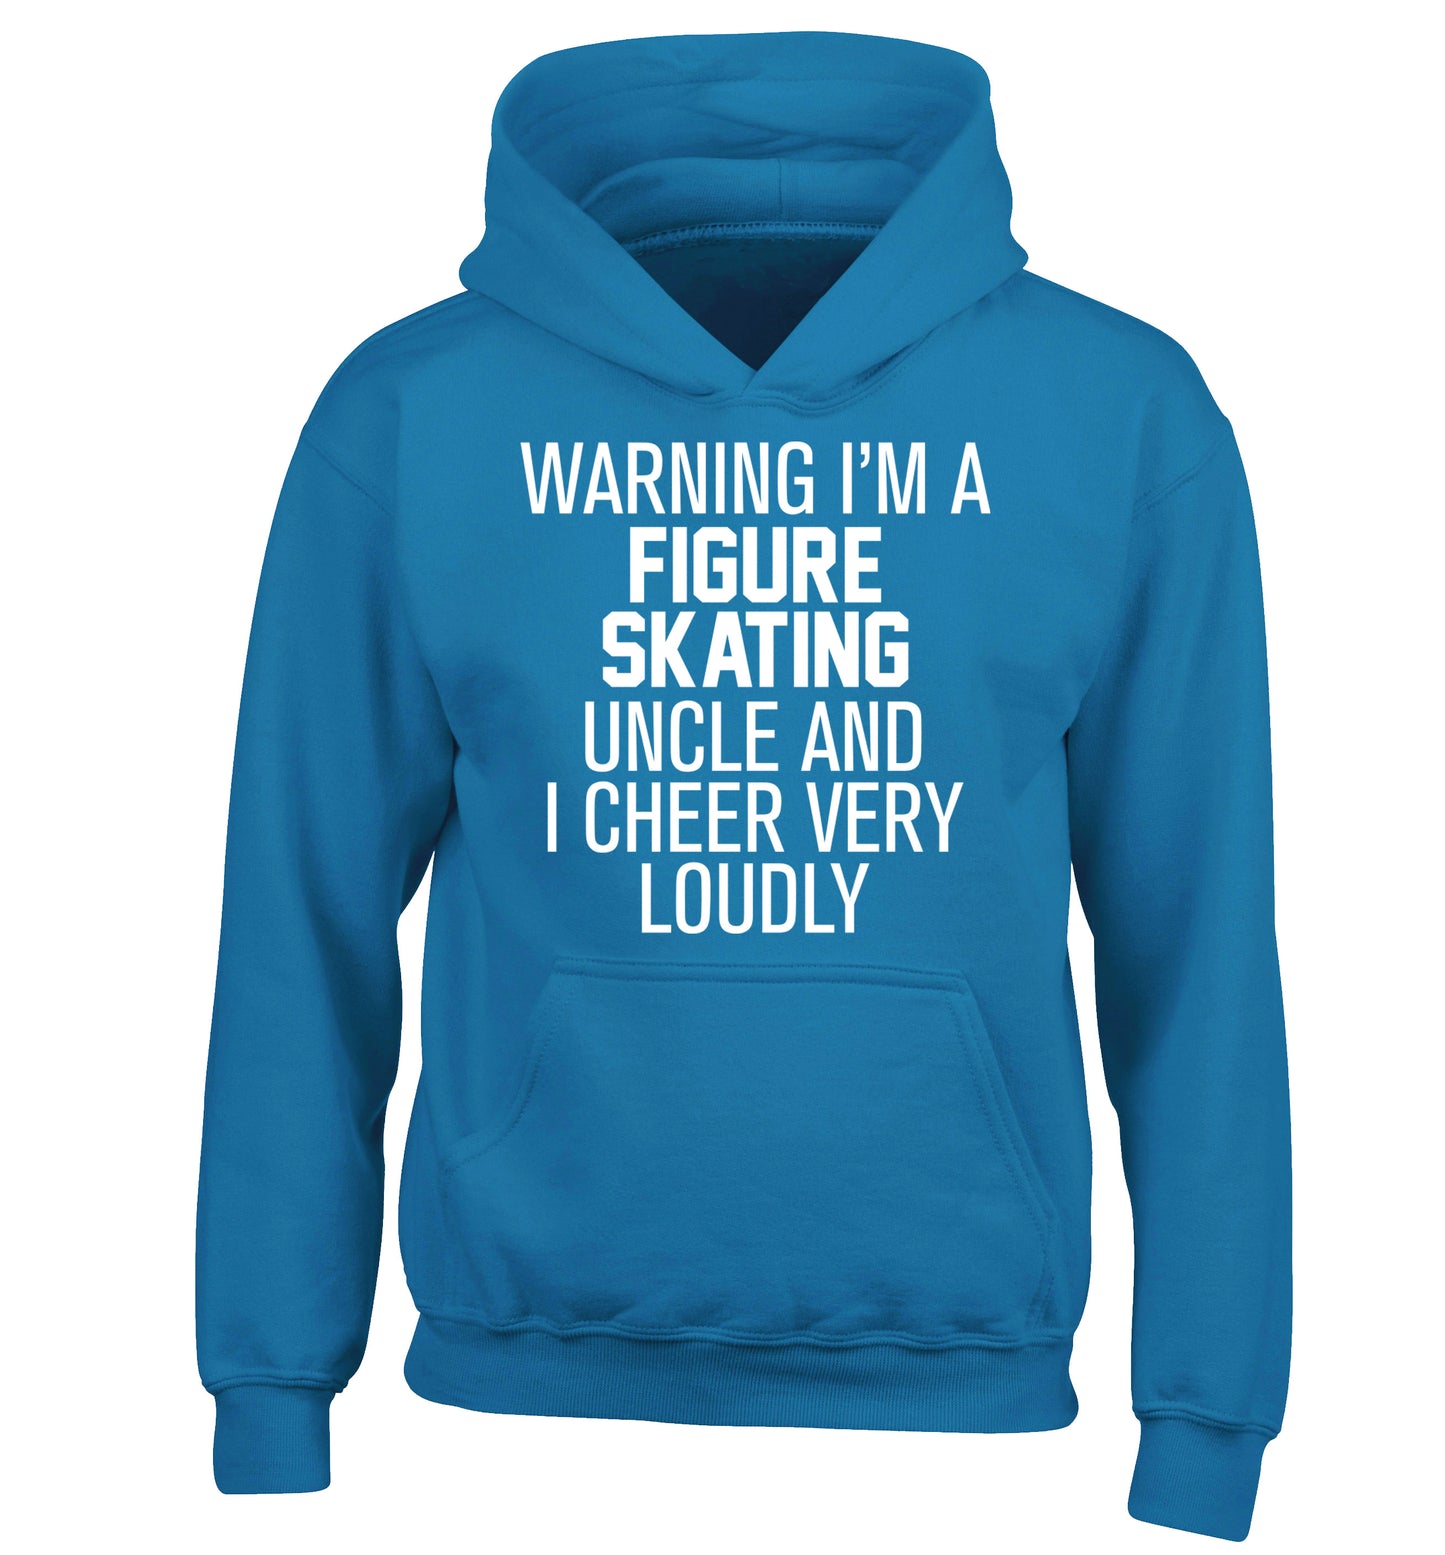 Warning I'm a figure skating uncle and I cheer very loudly children's blue hoodie 12-14 Years